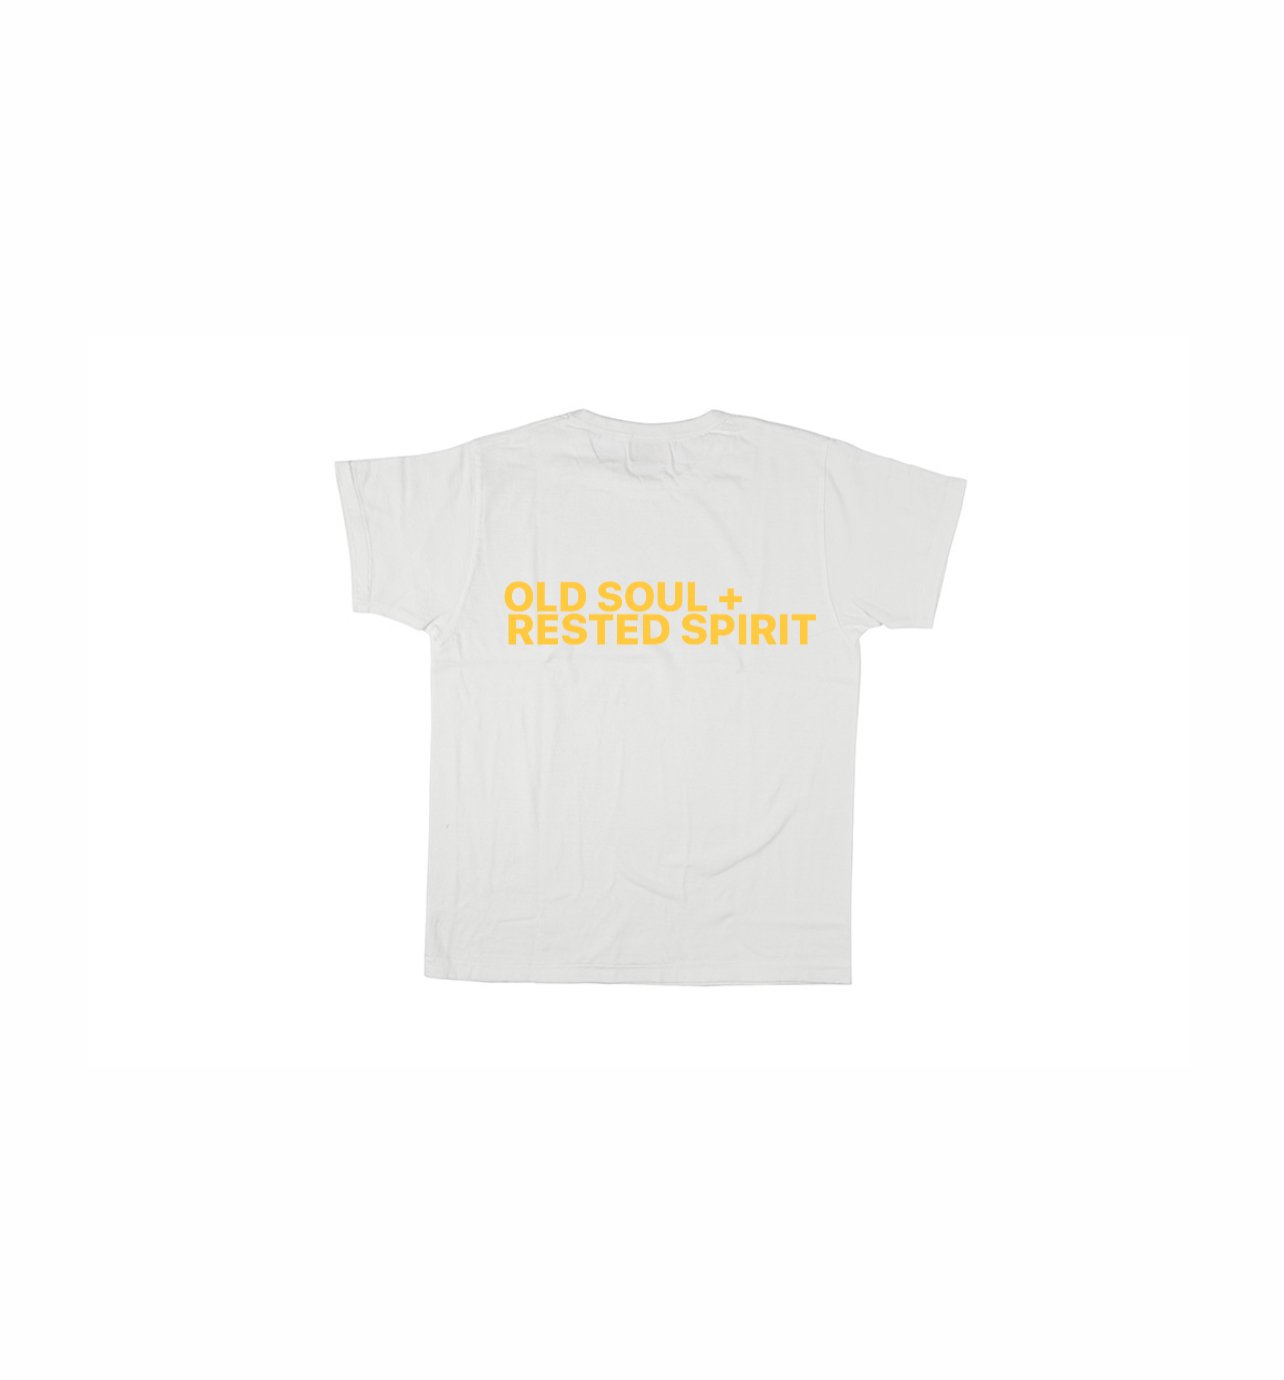 OLD SOUL + RESTED SPIRIT T SHIRT - White/Yellow